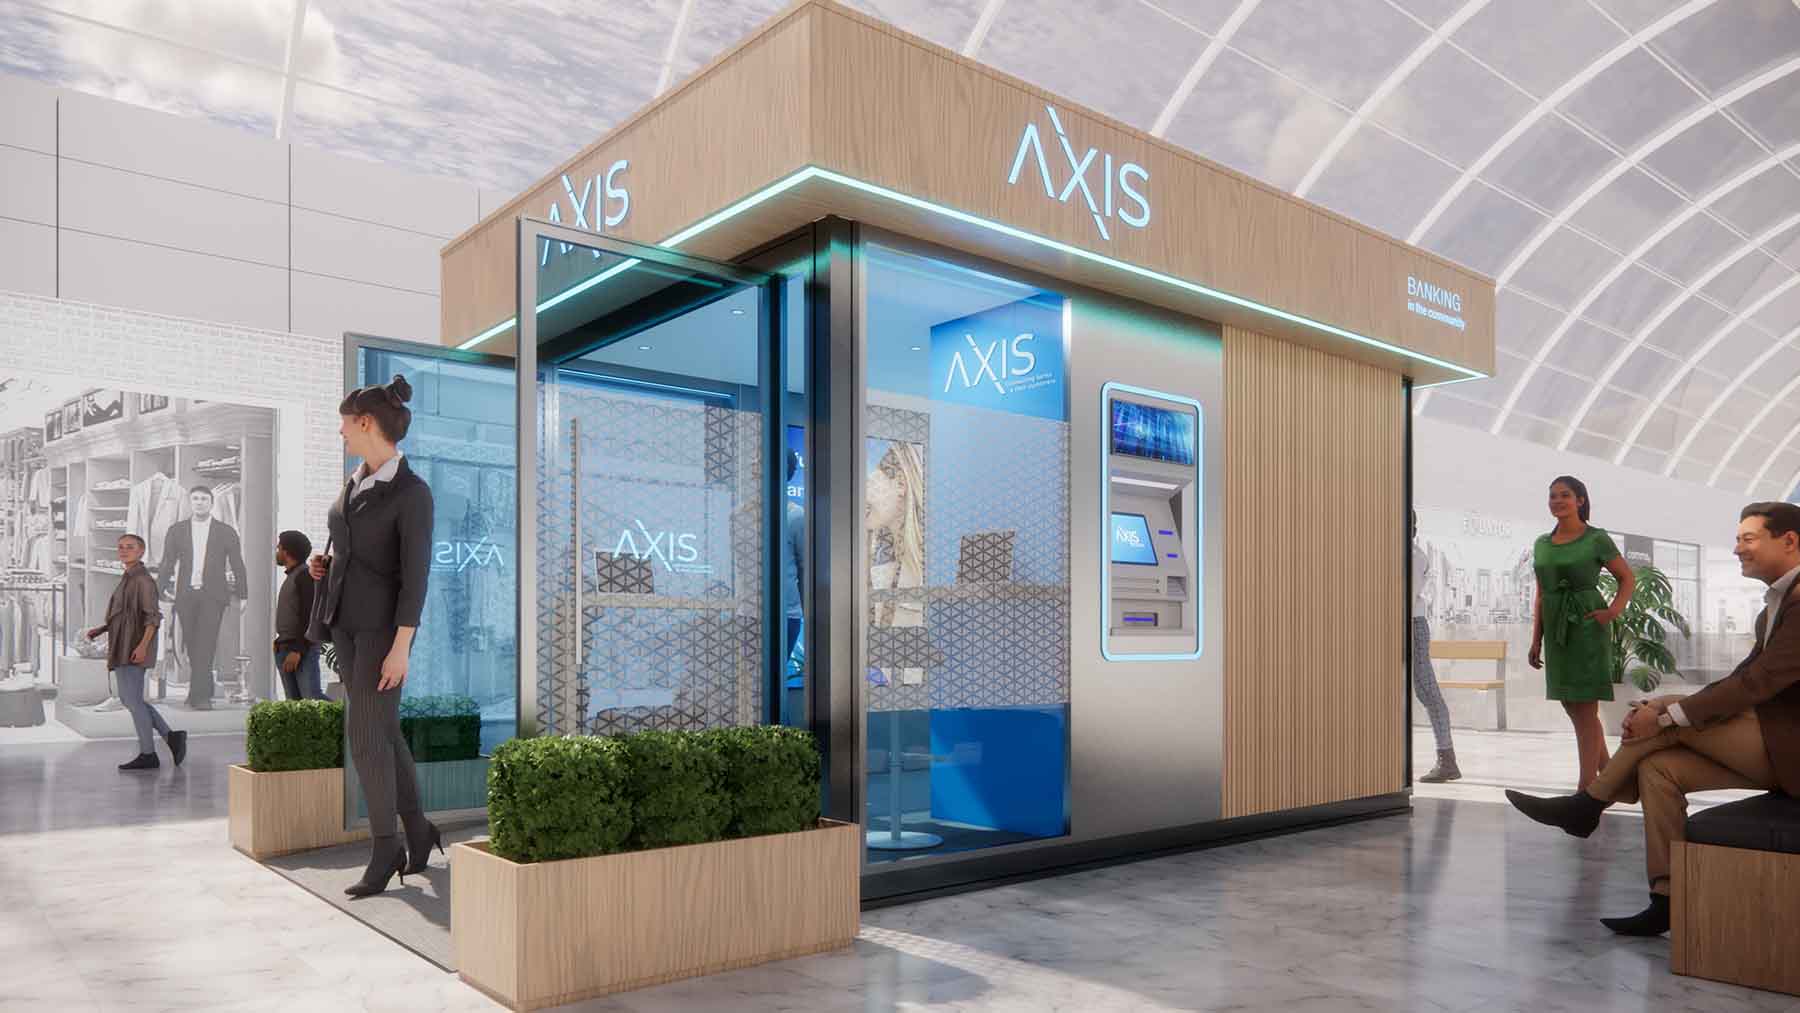 Image shows AXIS booth